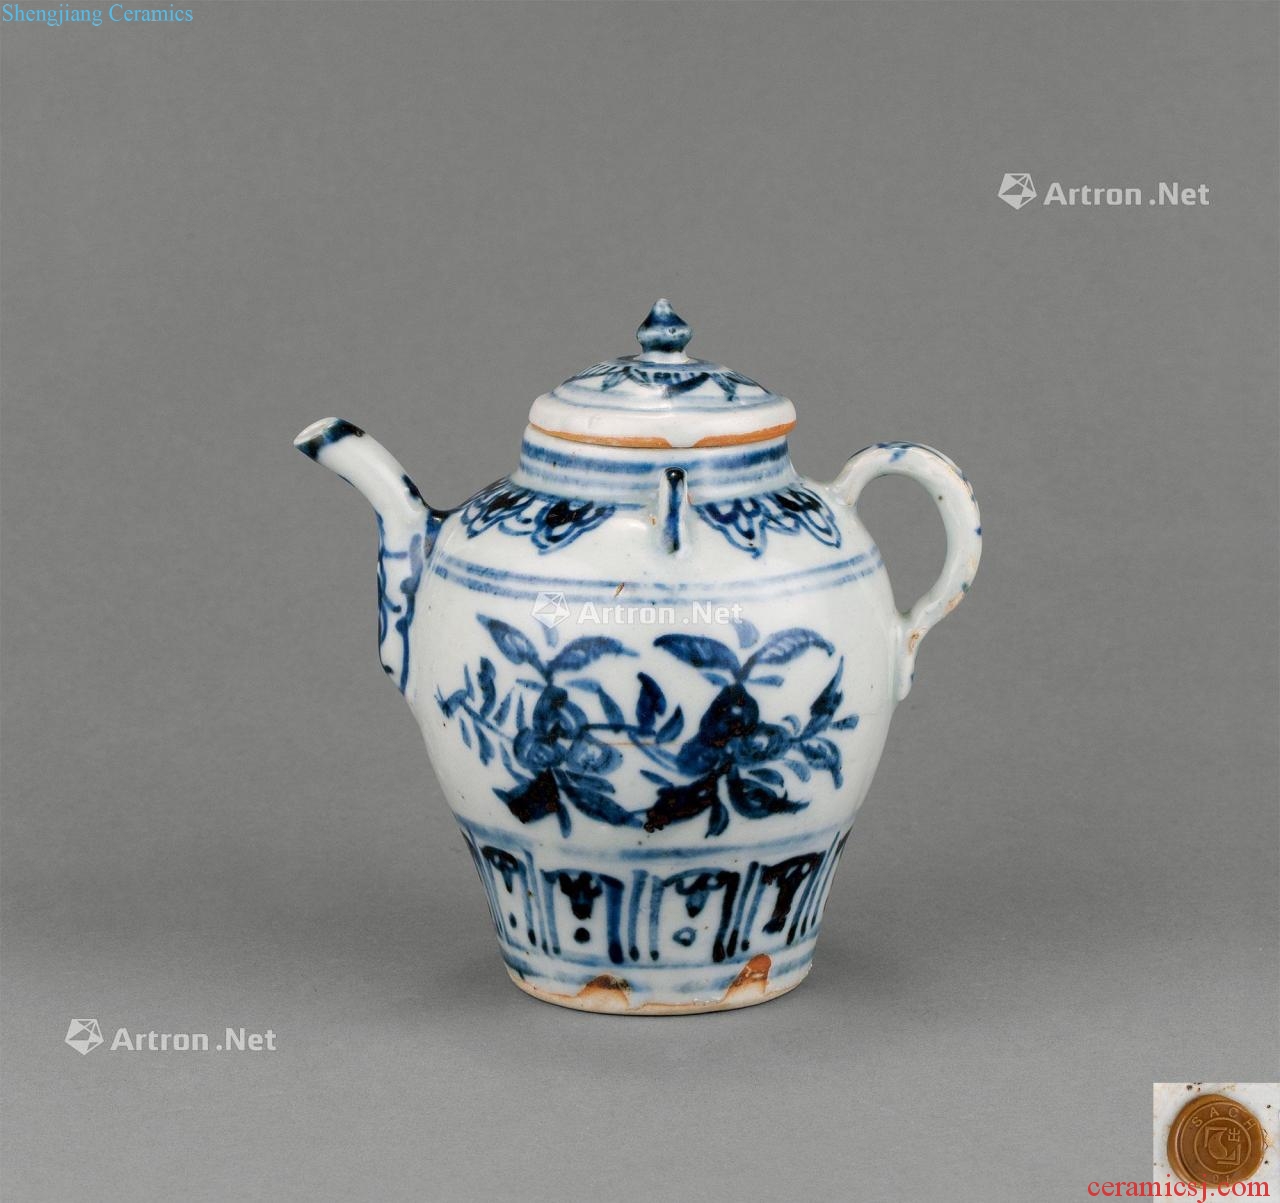 At the end of the yuan Ming Blue and white flower tattoos ewer